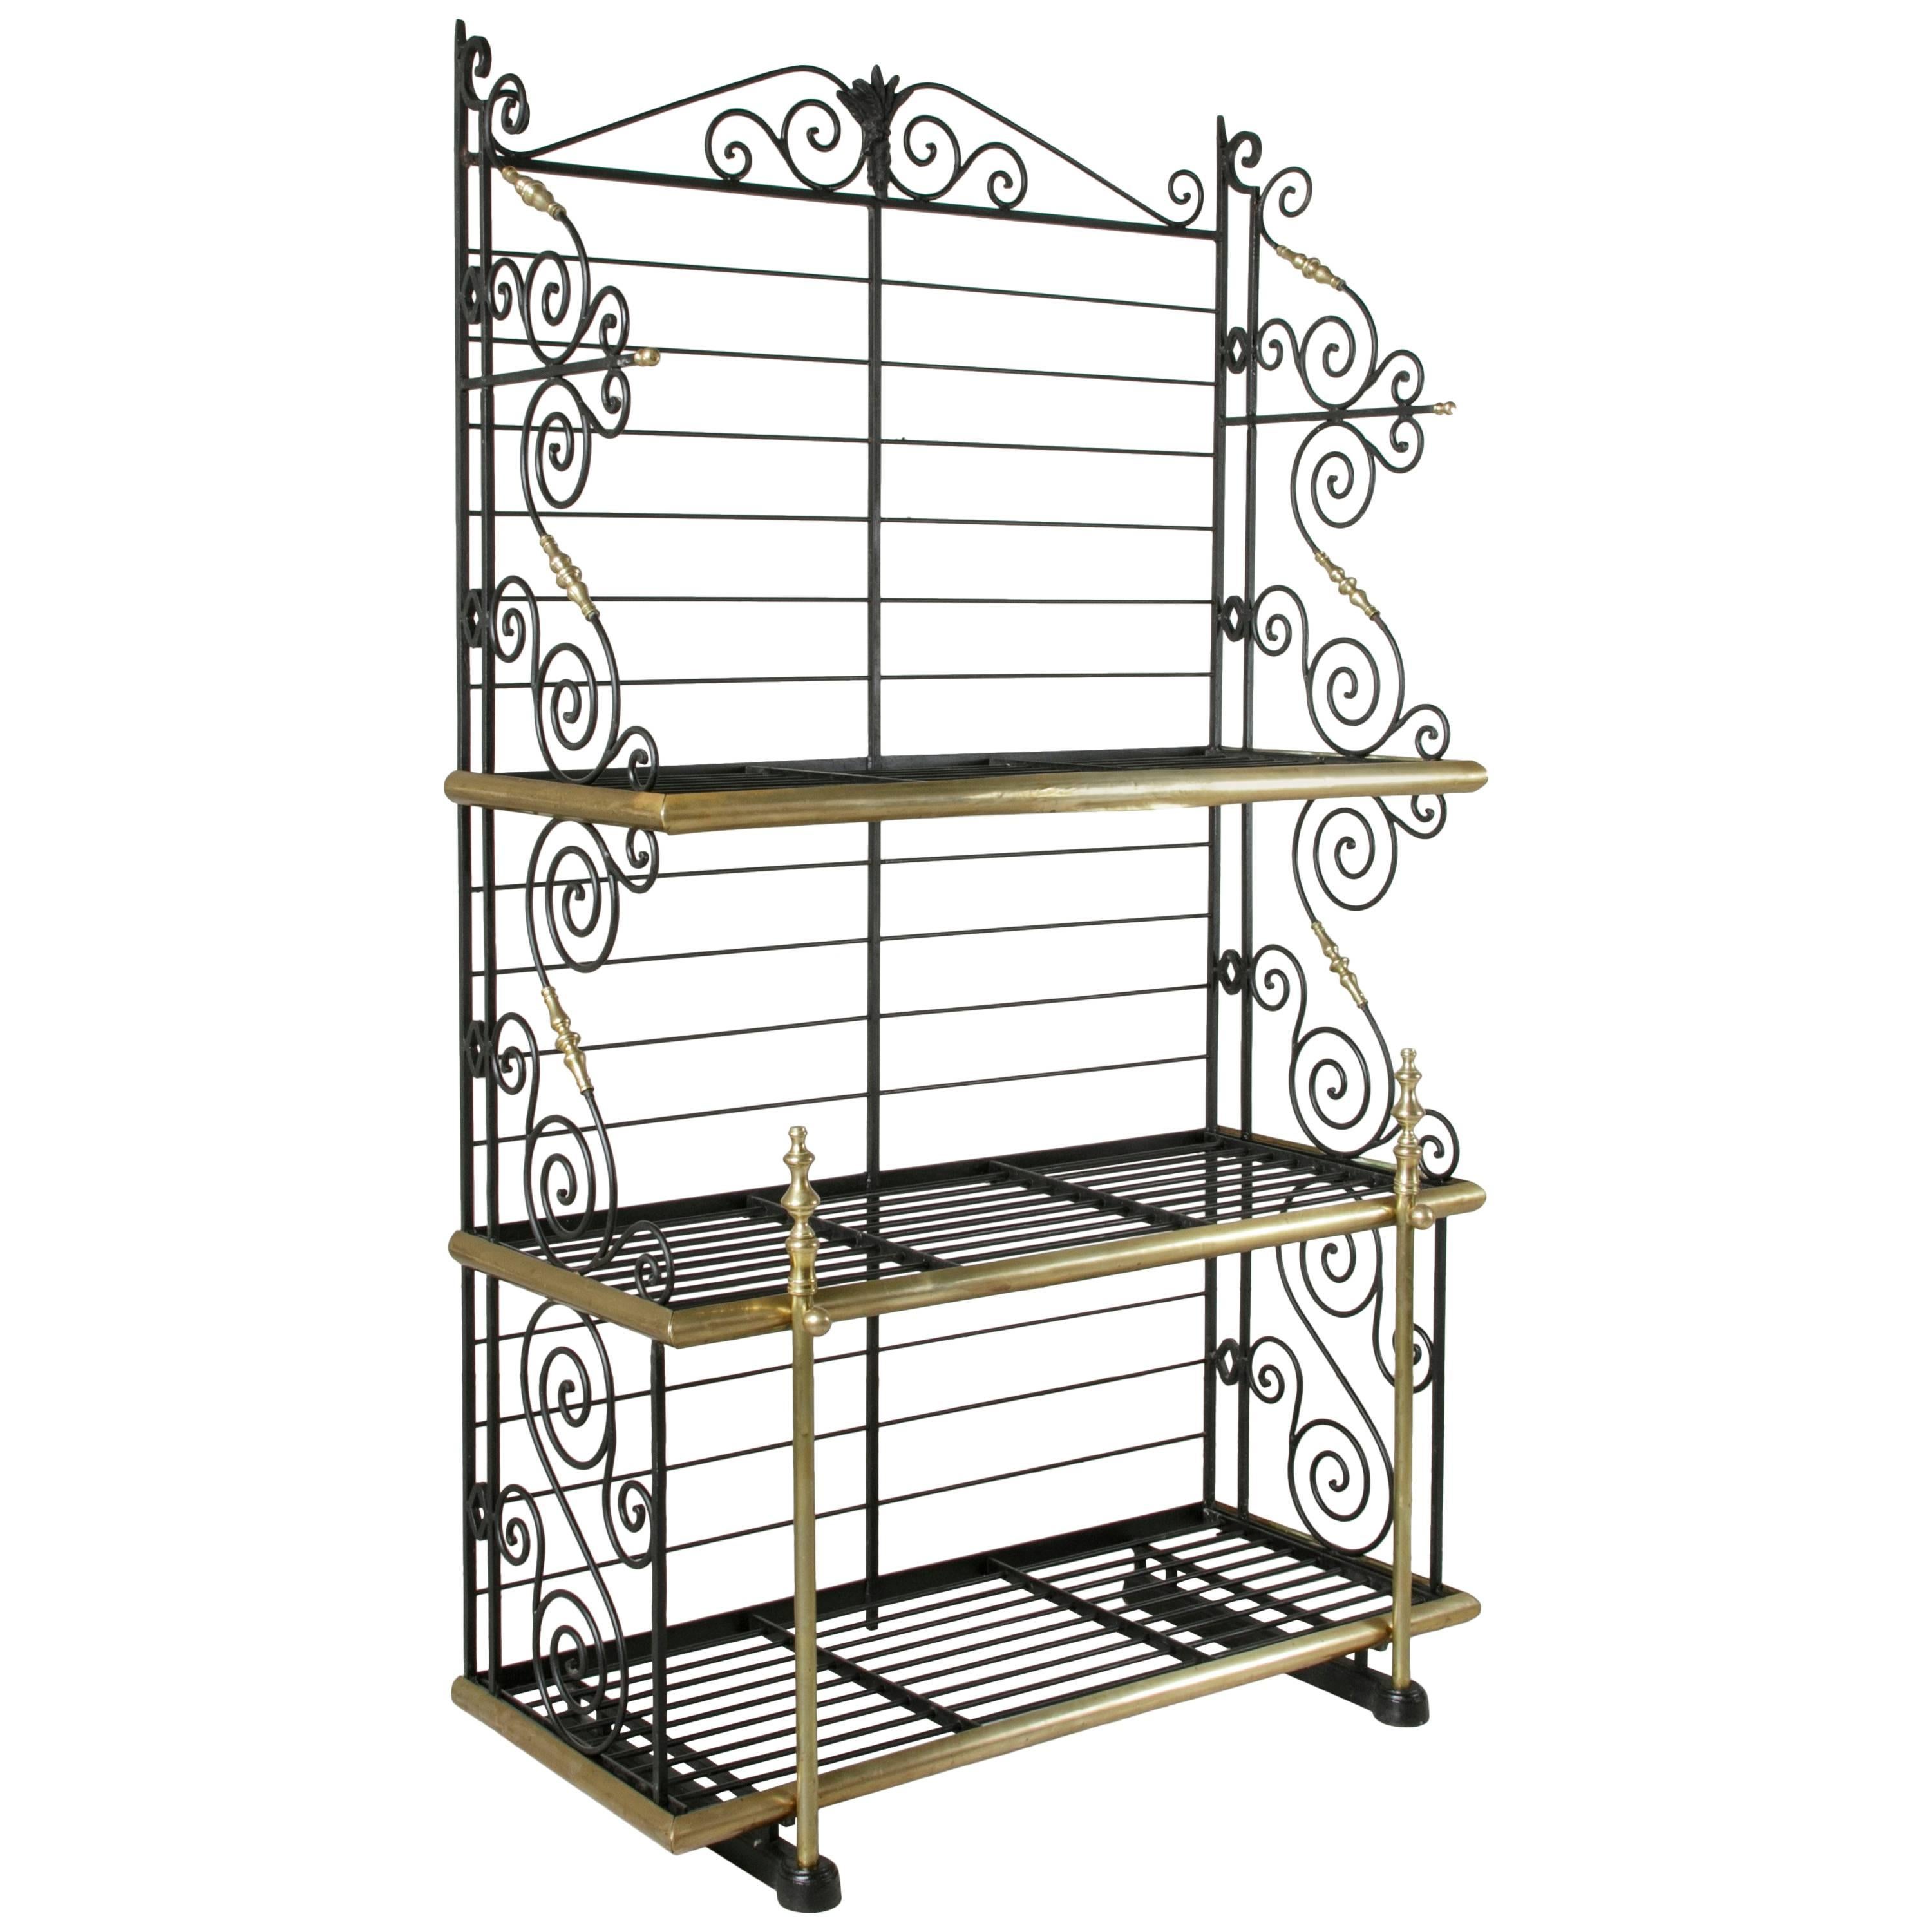 Early 20th Century French Iron and Brass Baker's Rack, Bread Rack, Etagere